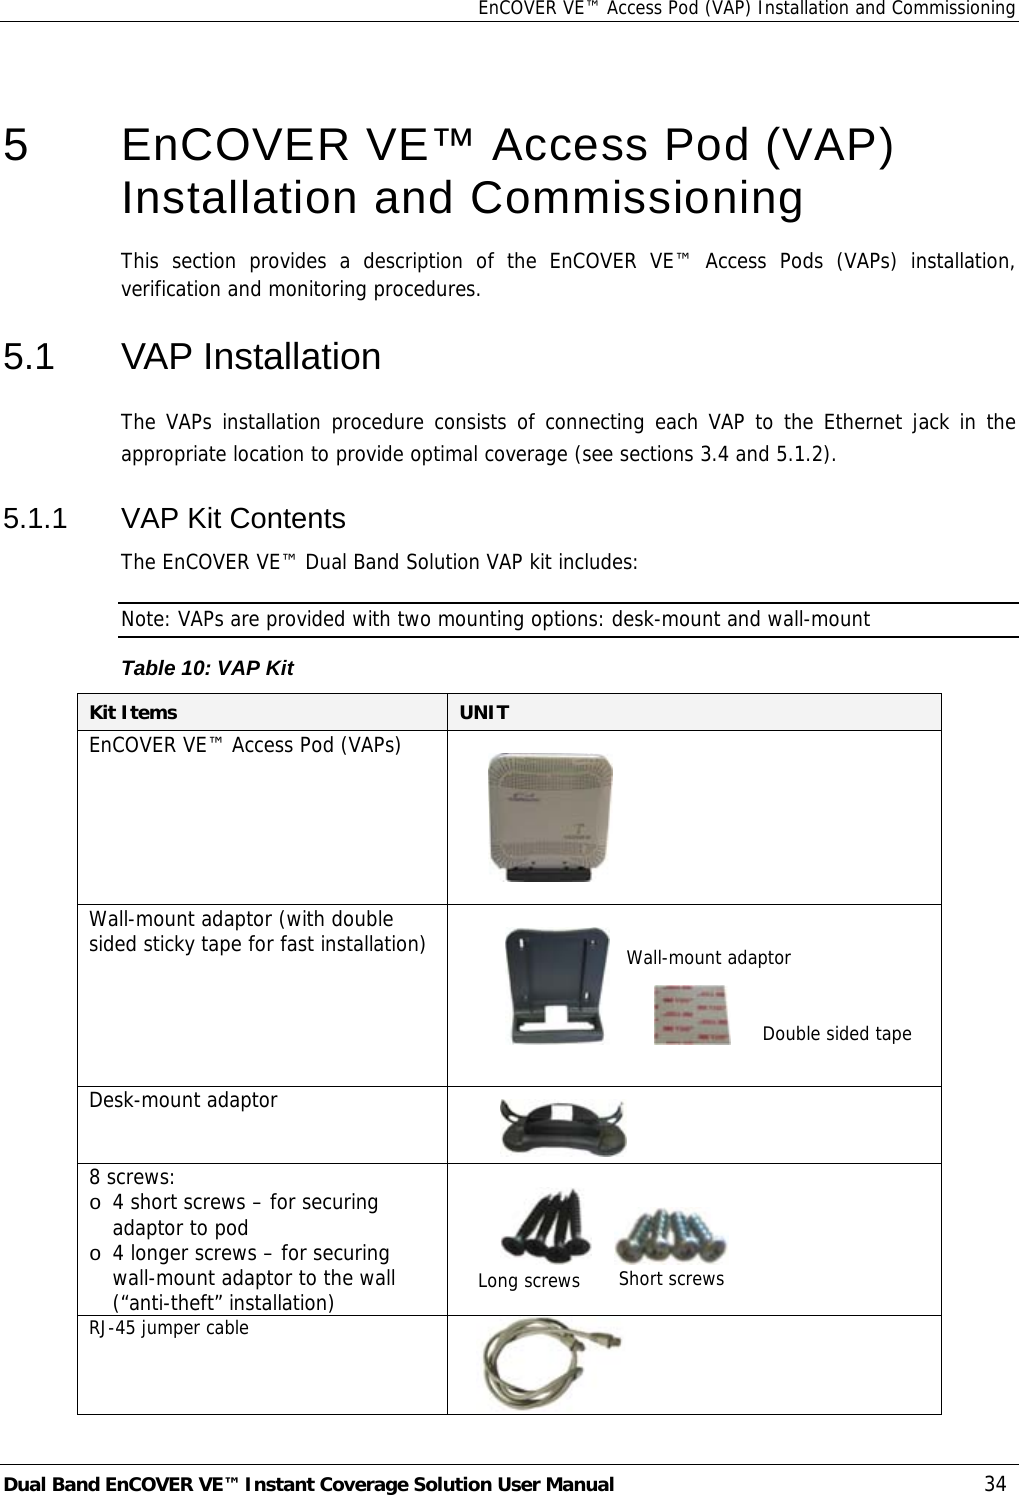 EnCOVER VE™ Access Pod (VAP) Installation and Commissioning Dual Band EnCOVER VE™ Instant Coverage Solution User Manual  34  5   EnCOVER VE™ Access Pod (VAP) Installation and Commissioning This section provides a description of the EnCOVER VE™ Access Pods (VAPs) installation, verification and monitoring procedures. 5.1 VAP Installation The VAPs installation procedure consists of connecting each VAP to the Ethernet jack in the appropriate location to provide optimal coverage (see sections  3.4 and  5.1.2). 5.1.1 VAP Kit Contents The EnCOVER VE™ Dual Band Solution VAP kit includes:  Note: VAPs are provided with two mounting options: desk-mount and wall-mount  Table 10: VAP Kit Kit Items  UNIT  EnCOVER VE™ Access Pod (VAPs)                                            Wall-mount adaptor (with double sided sticky tape for fast installation)                                   Desk-mount adaptor          8 screws: o 4 short screws – for securing adaptor to pod o 4 longer screws – for securing wall-mount adaptor to the wall (“anti-theft” installation)                   RJ-45 jumper cable   Wall-mount adaptor Double sided tape Long screws Short screws